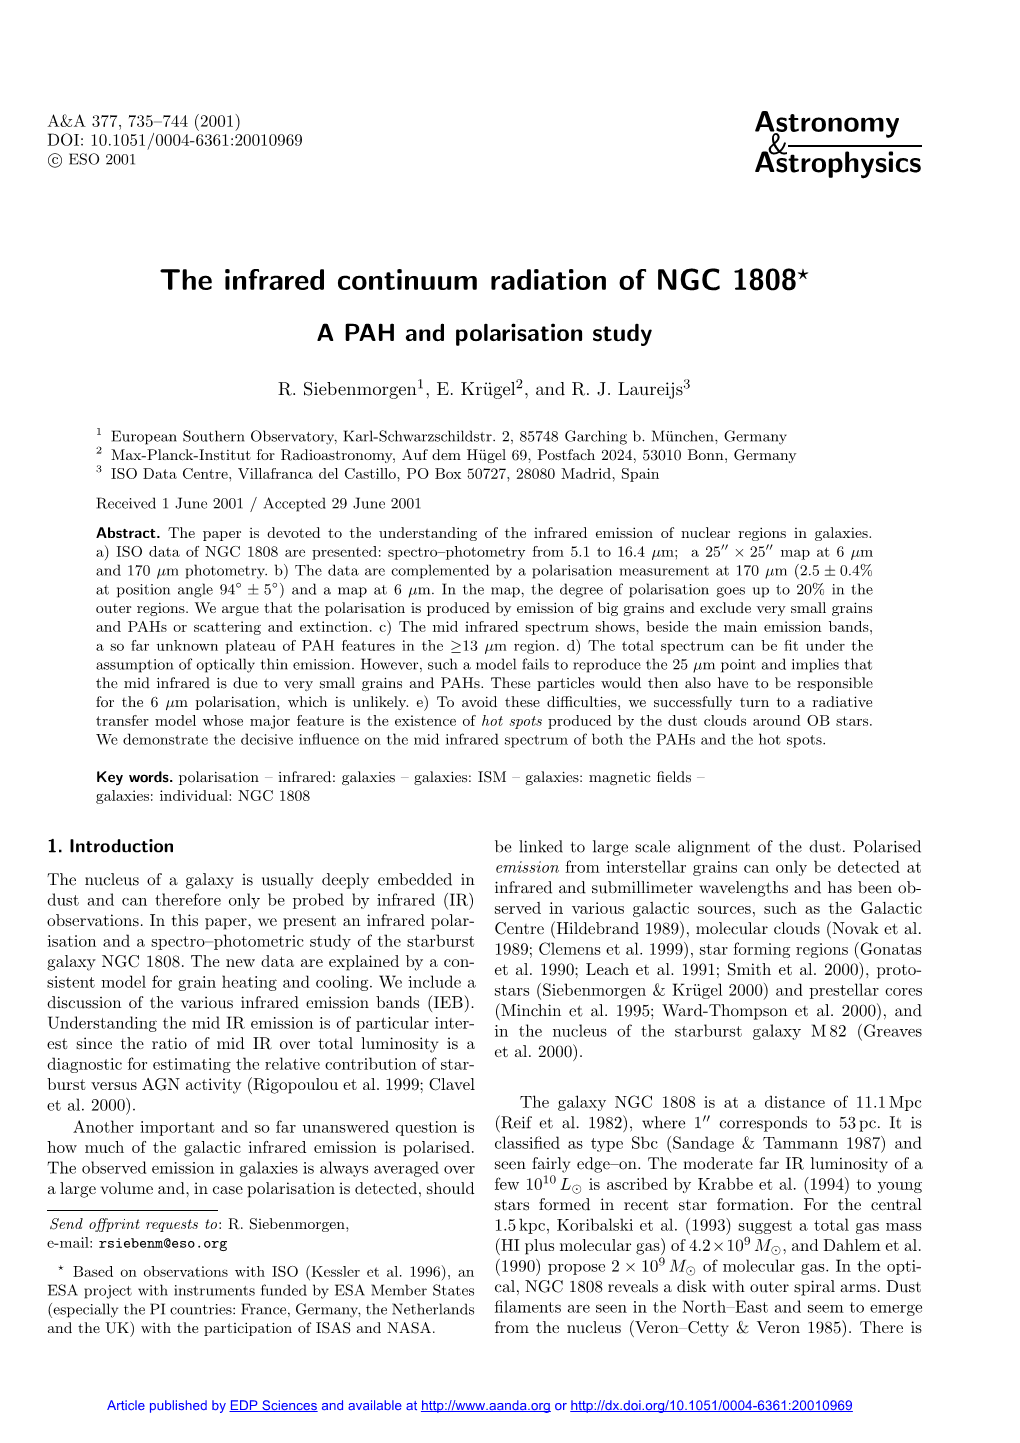 The Infrared Continuum Radiation of NGC 1808?